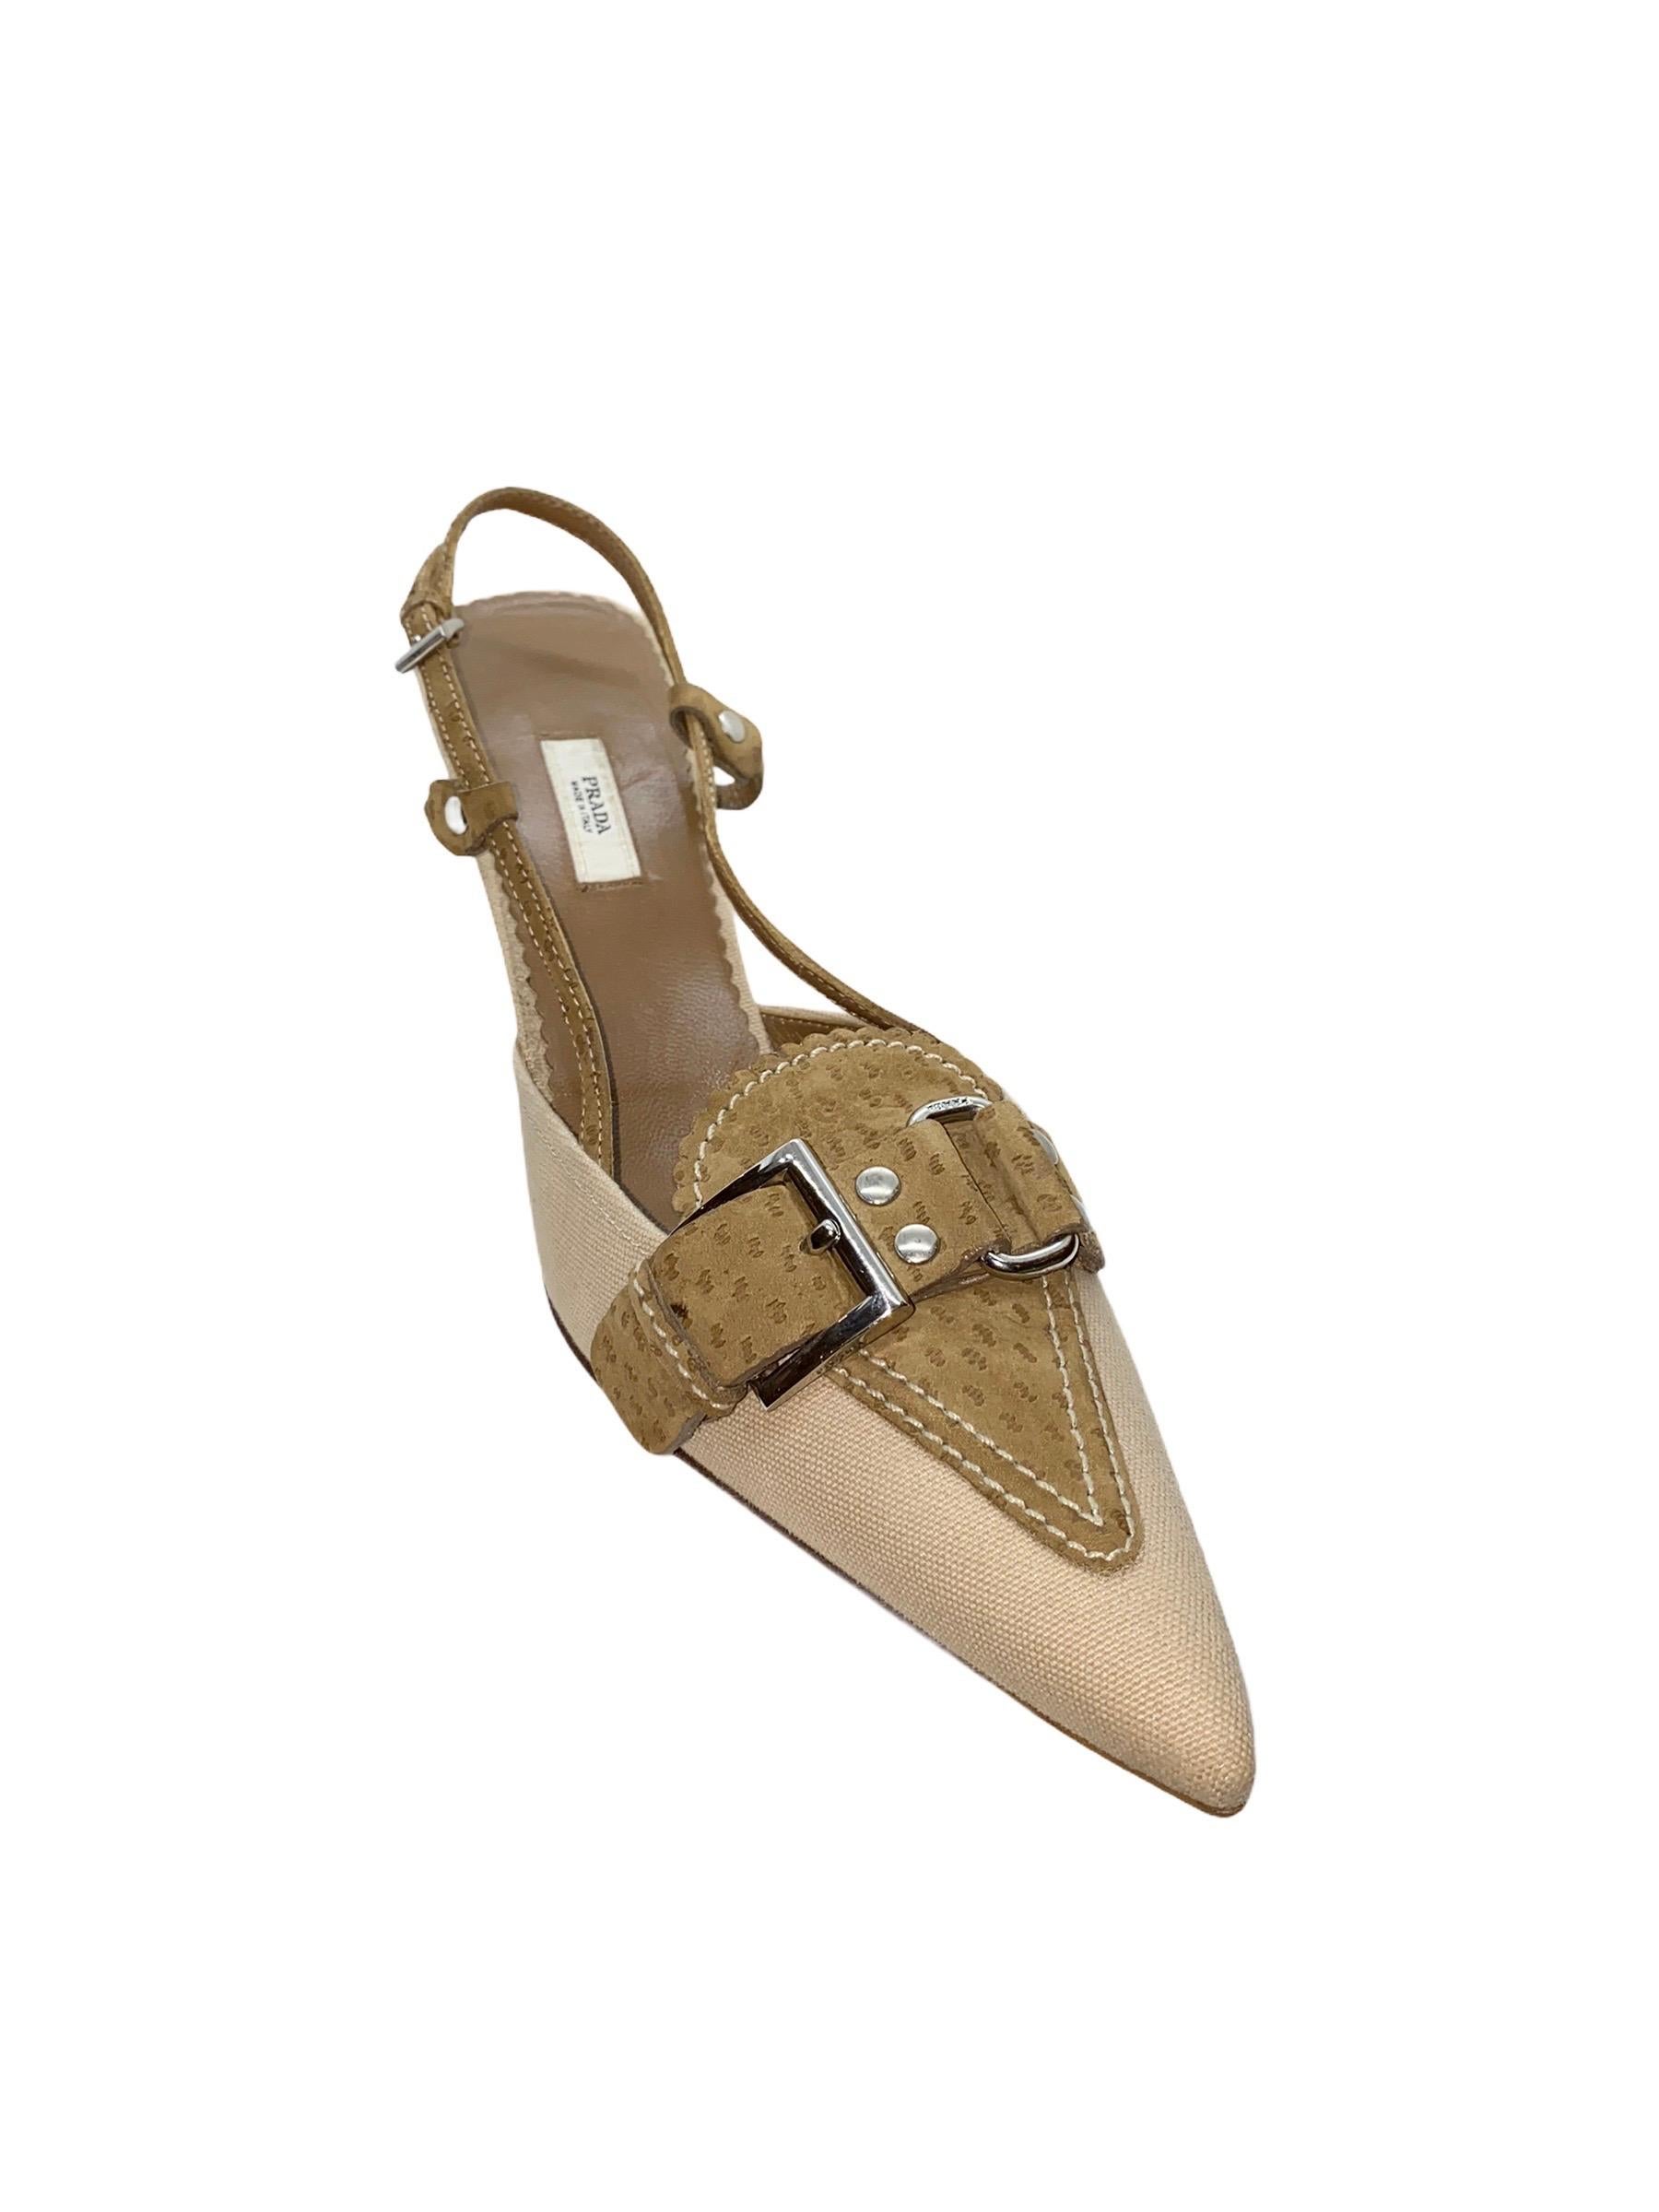 Beautiful Prada Slingback Mules
Canvas & Suede
Classic style
Made in Italy
Silver-colored hardware, engraved „Prada“
Size 40
Brandnew & unworn
Comes with Prada dustbag